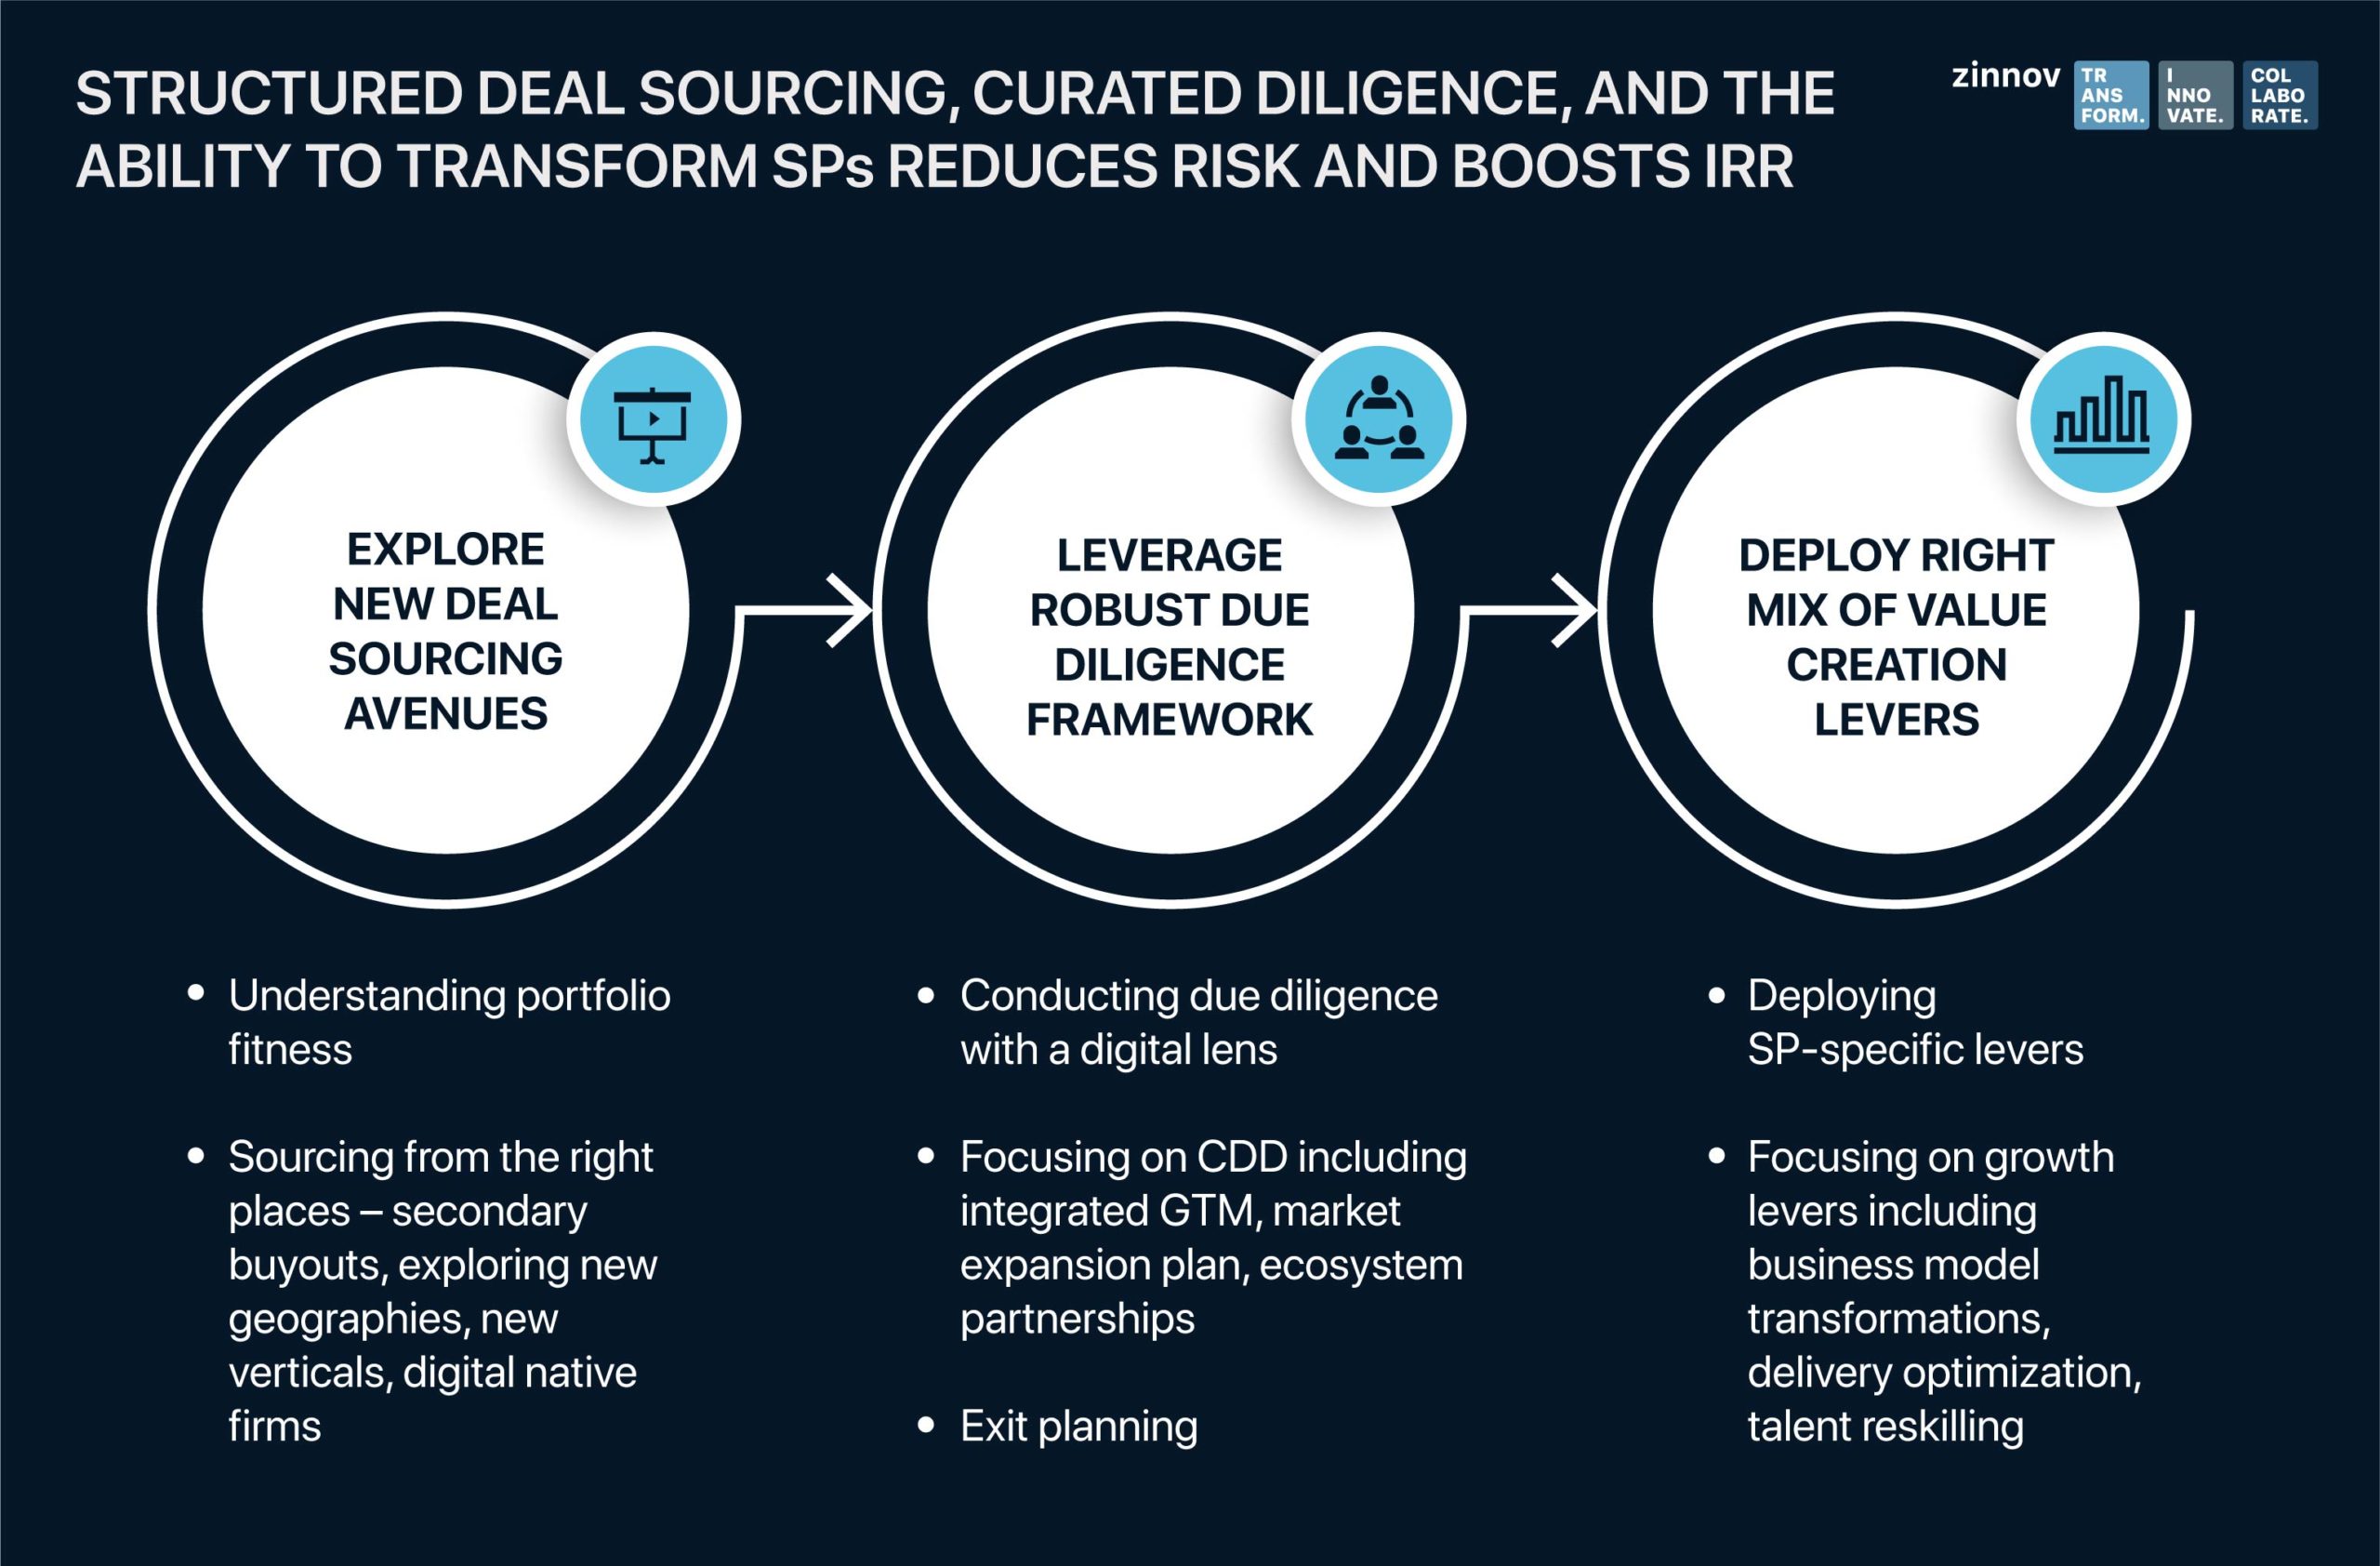 Deal sourcing, curated diligence and the ability to transform sps 